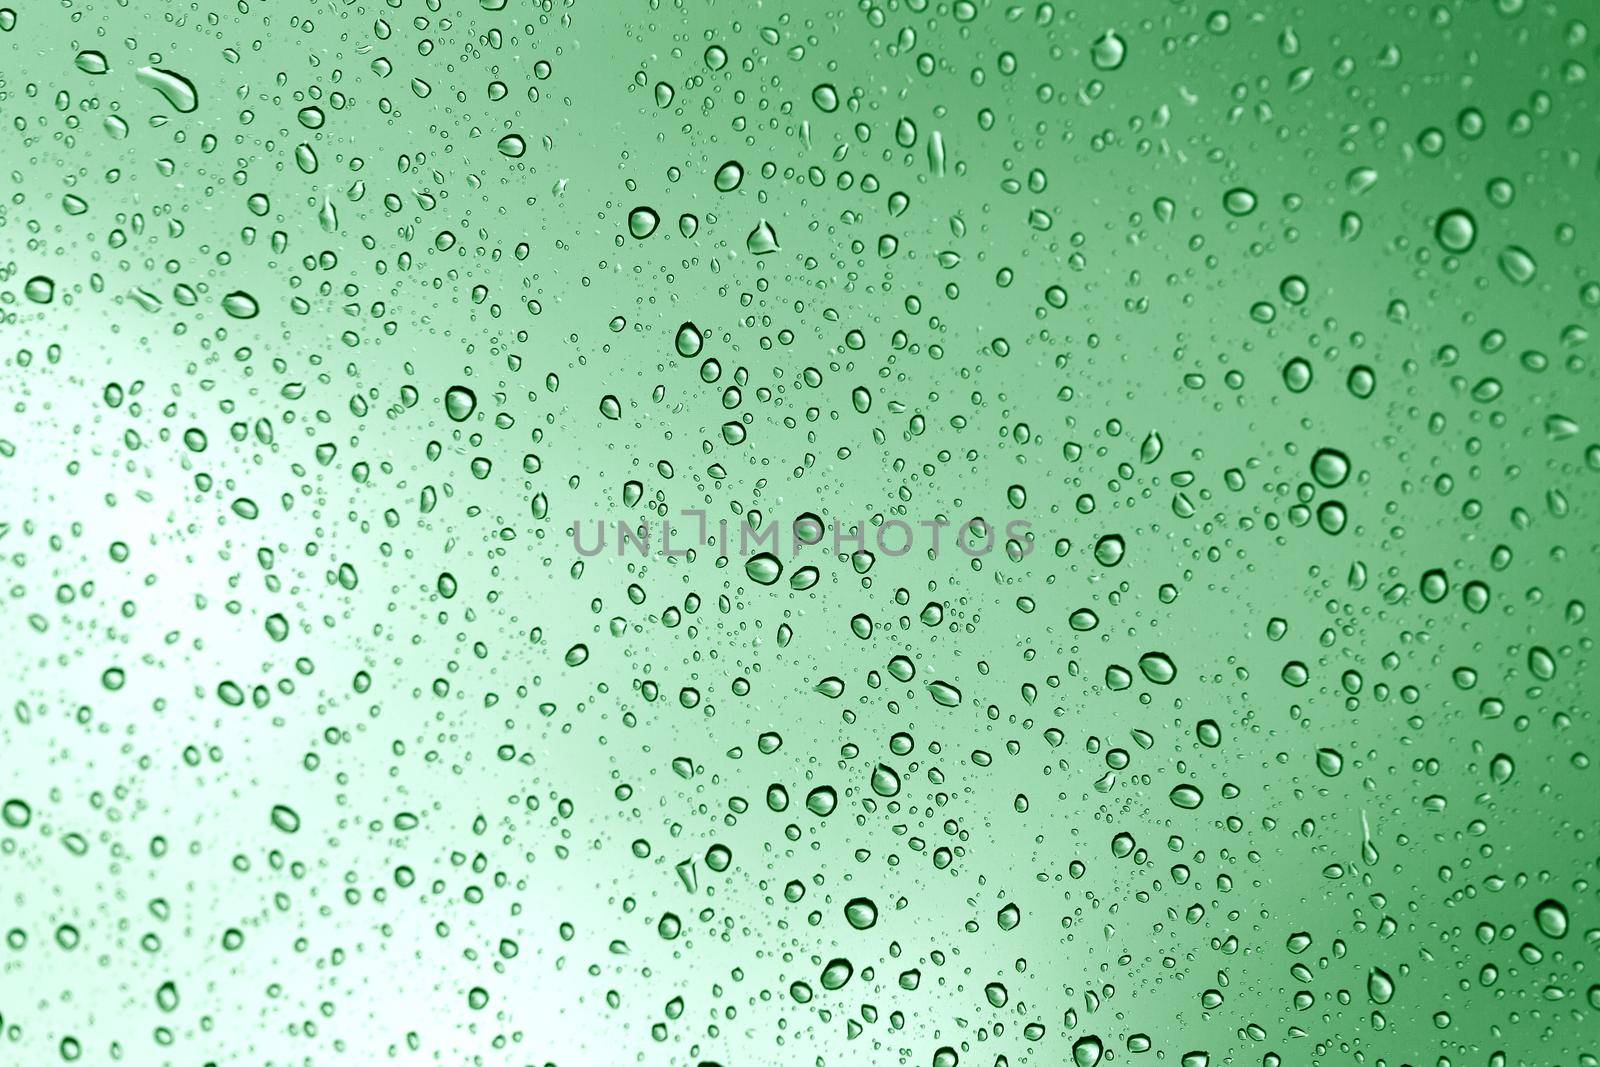 Rainy water drop green on glass mirror background.